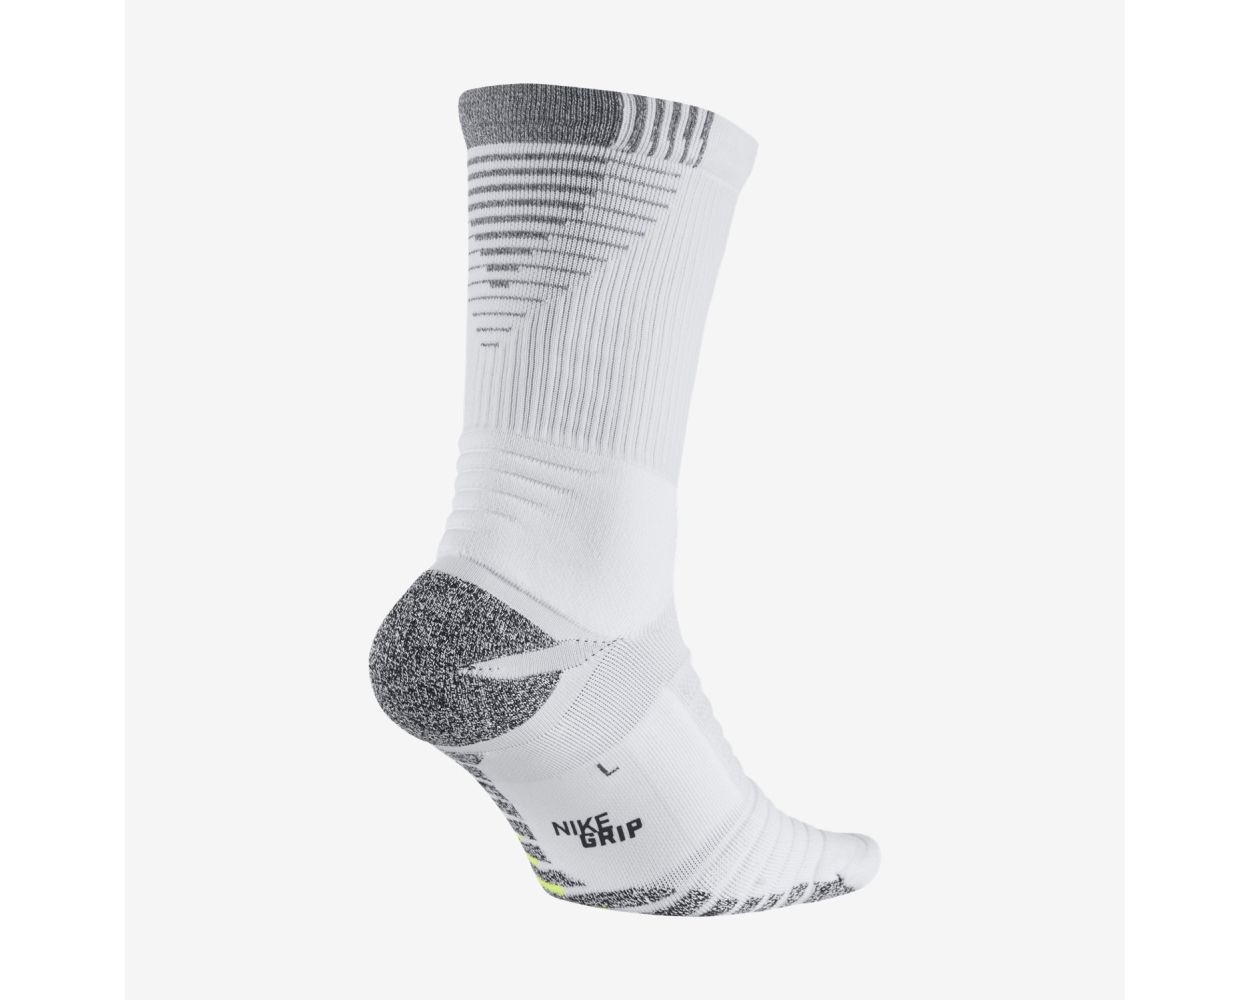 NikeGrip Sock Review - Traction Starts On The Inside - Soccer